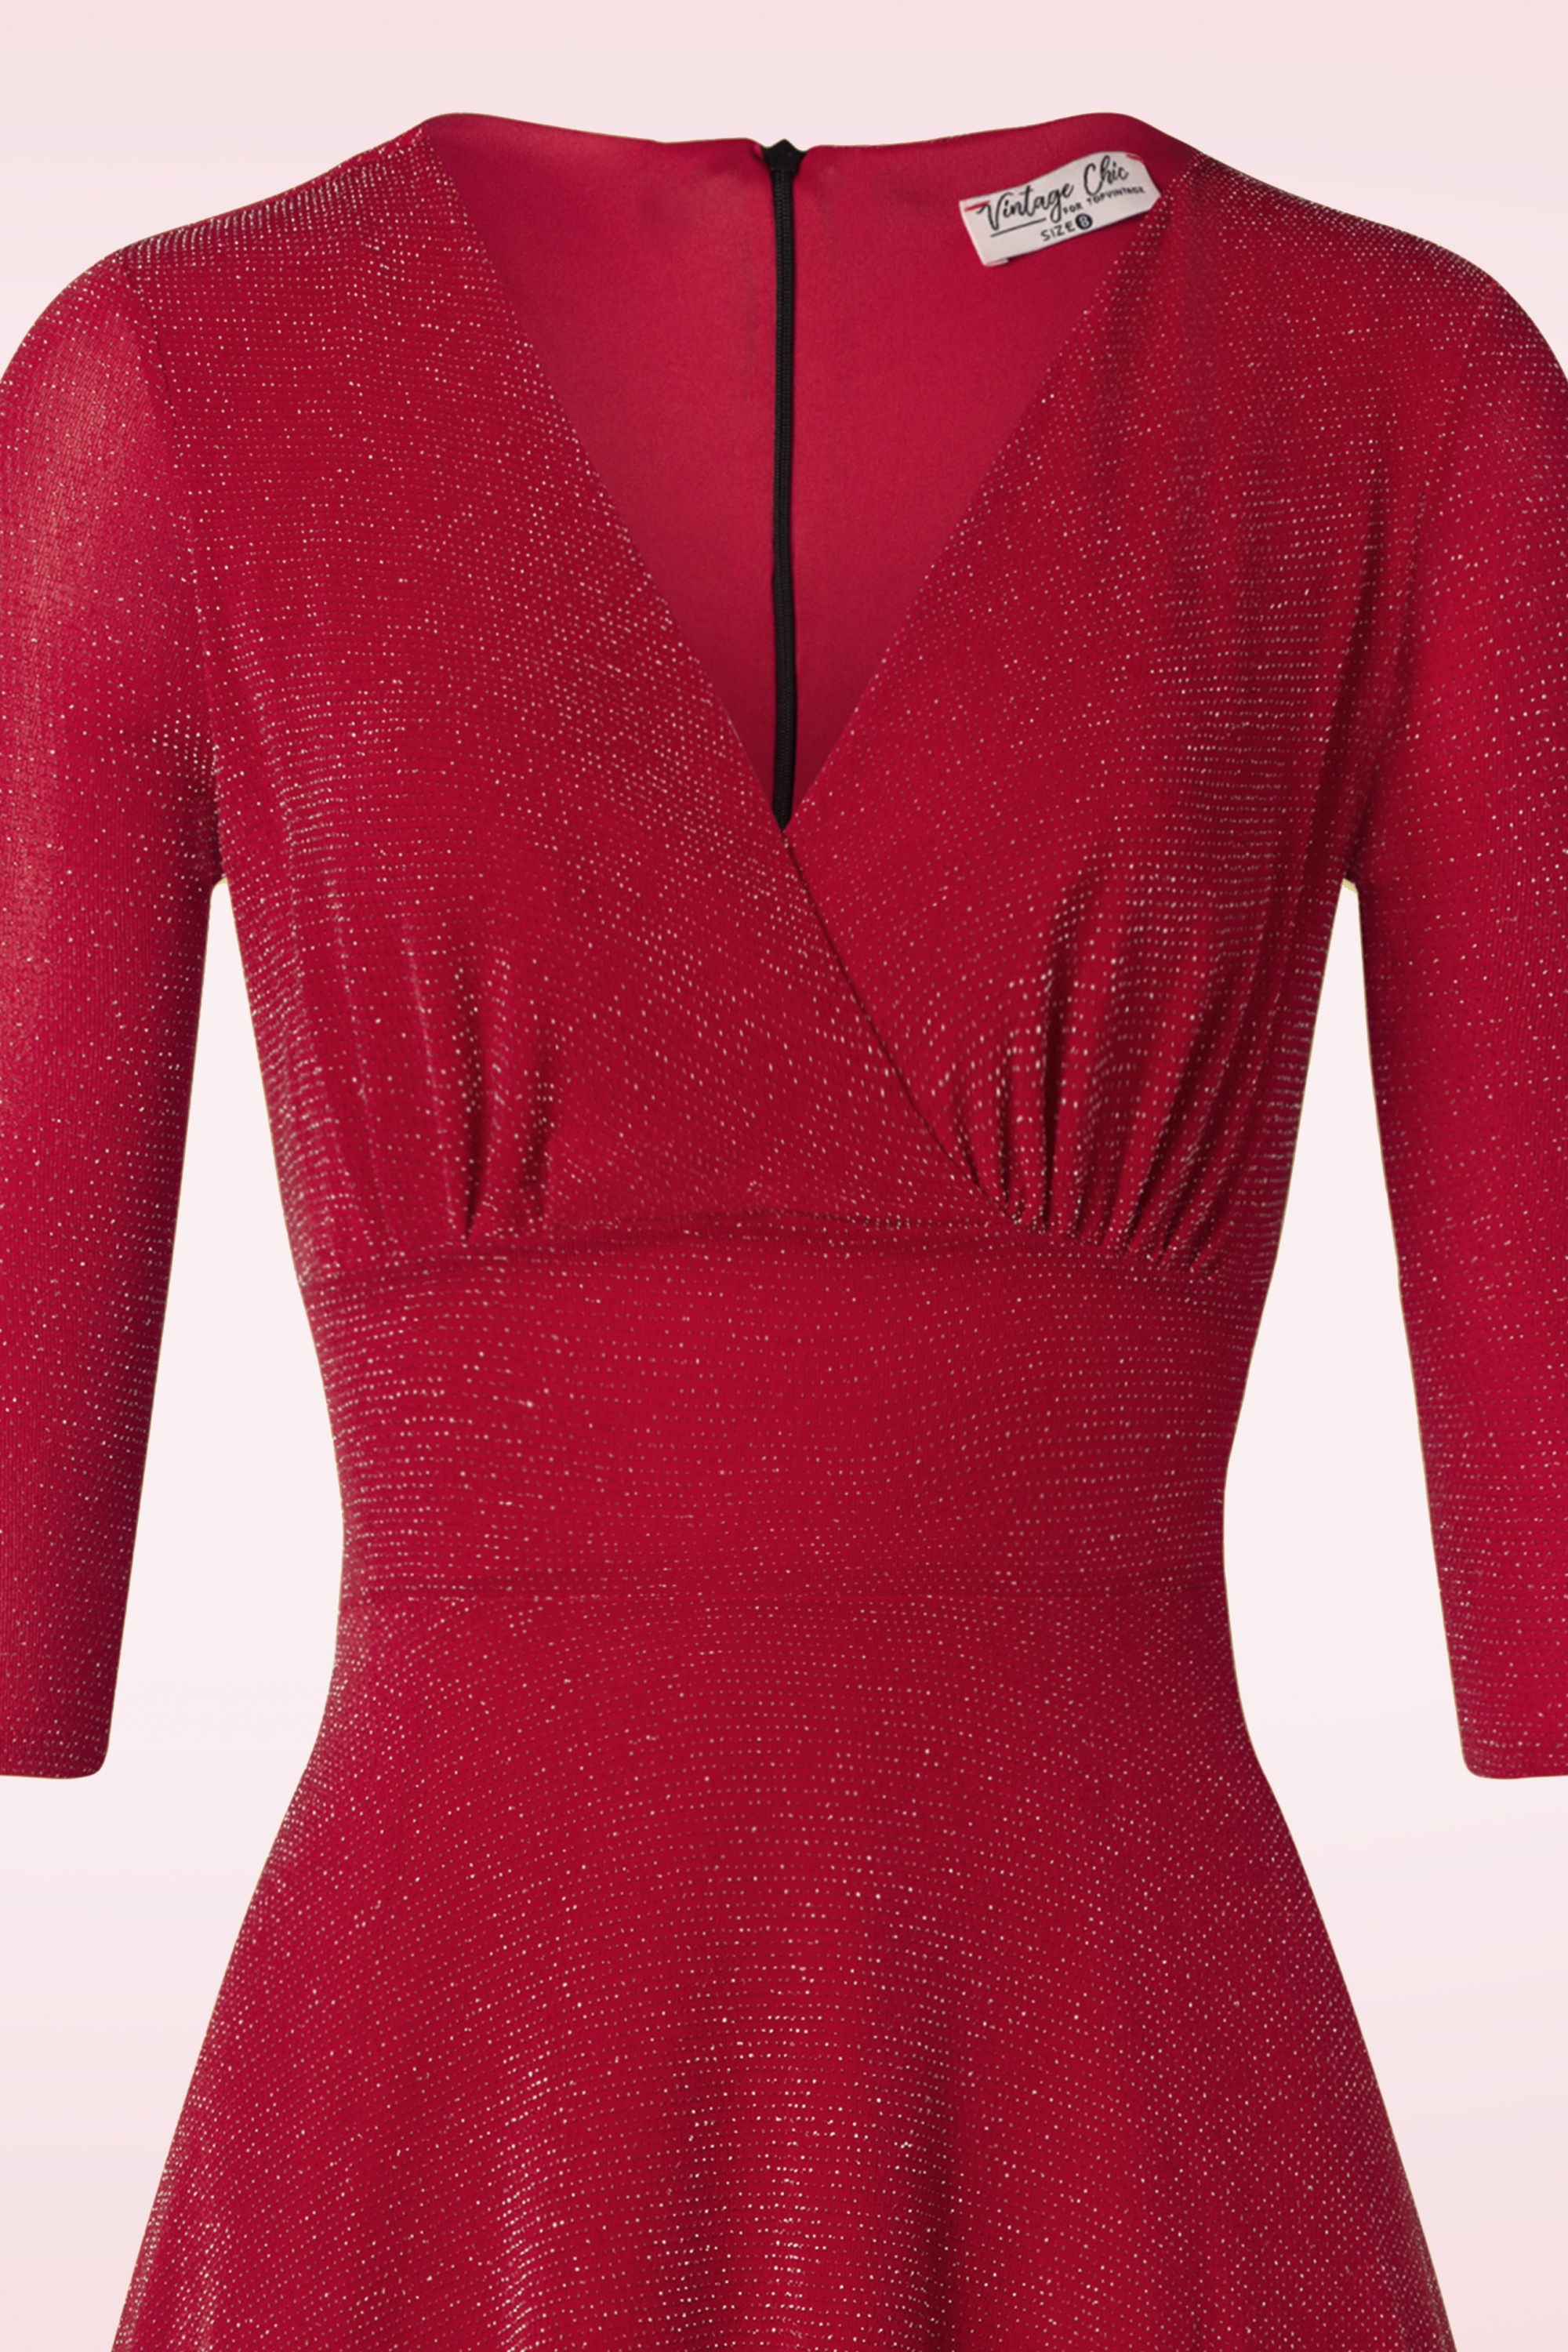 Vintage Chic for Topvintage - Gloria glitter swing jurk in rood 3